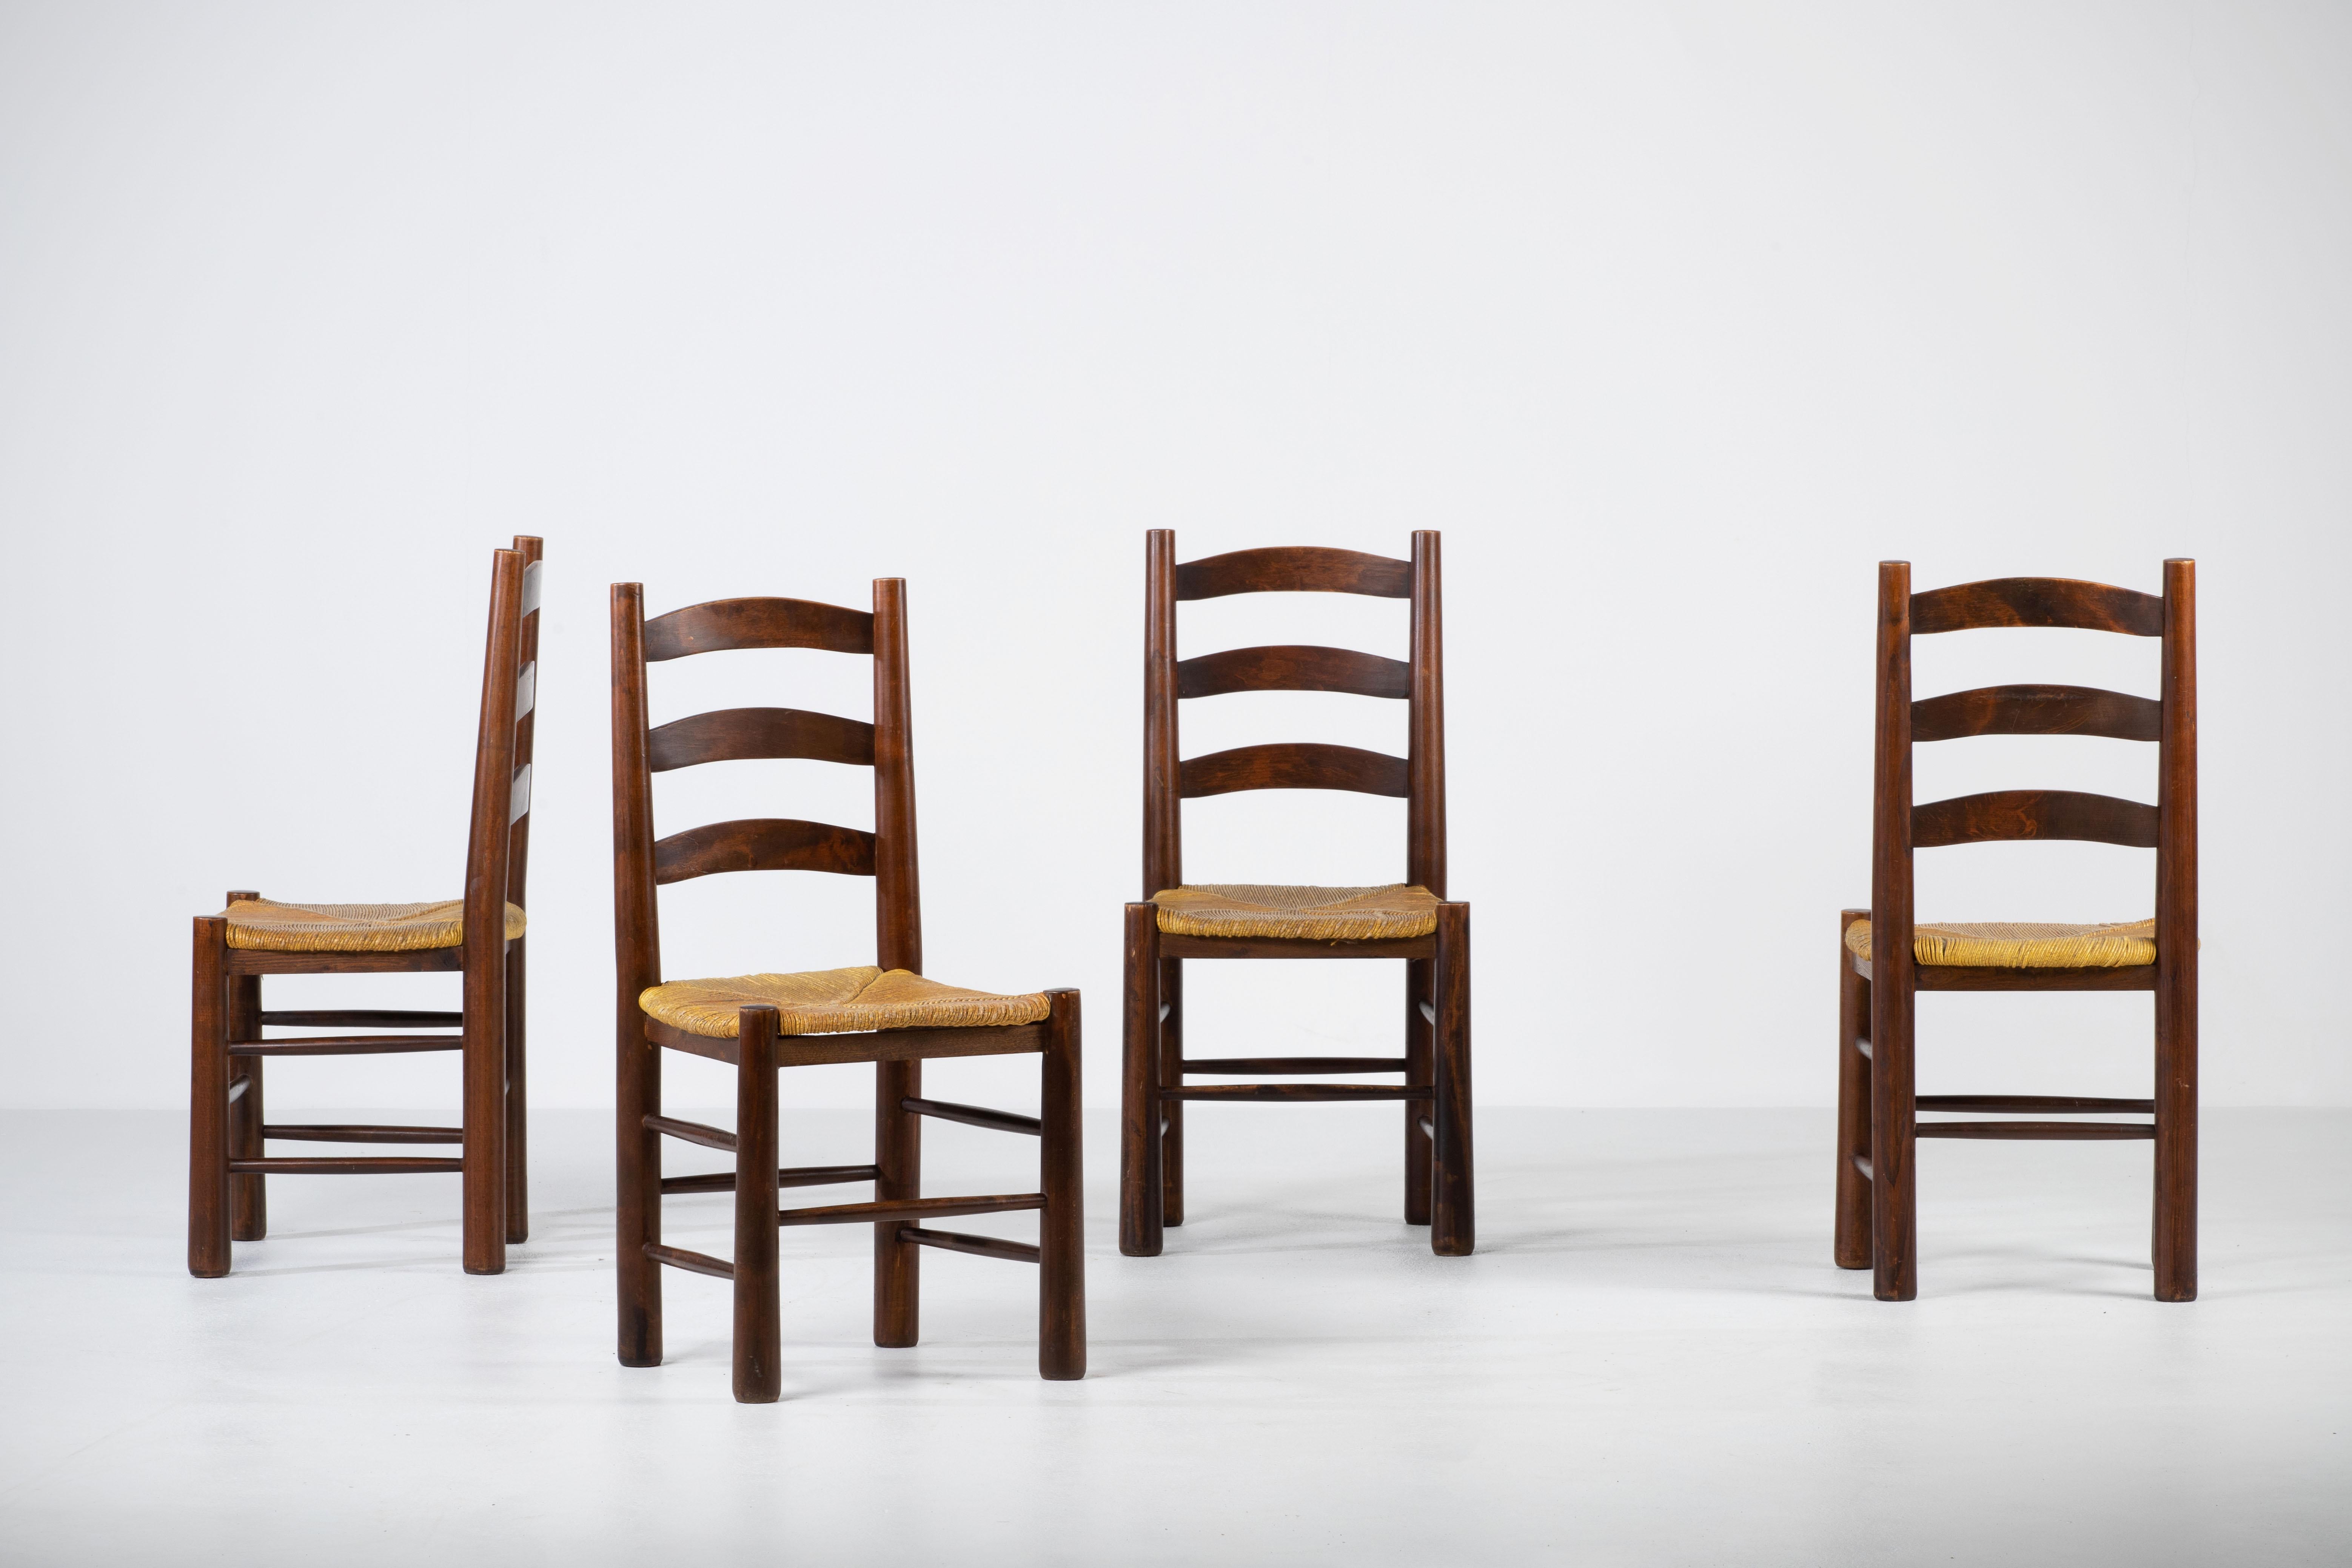 French Mid-Century Set of 6 Chairs in style of Perriand, France, 1940 For Sale